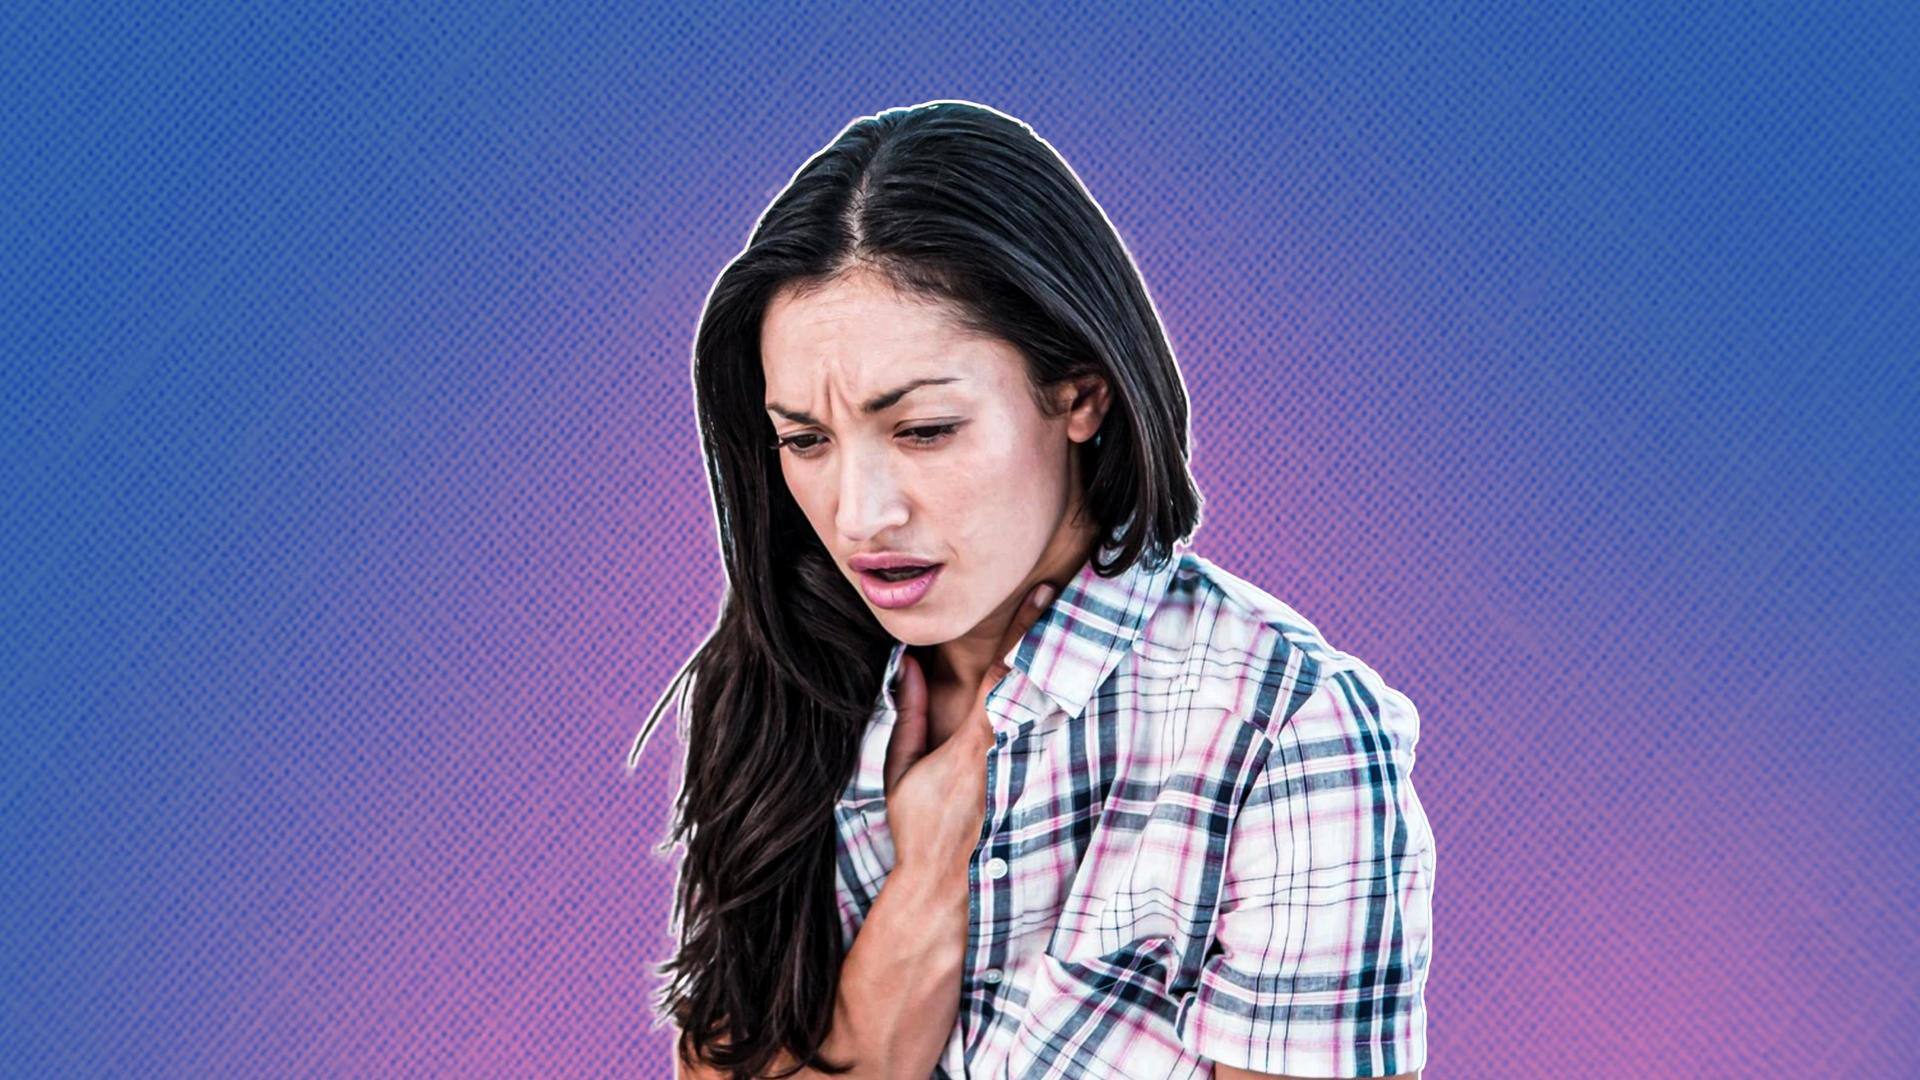 Experiencing sudden hiccups? Here's how to stop them